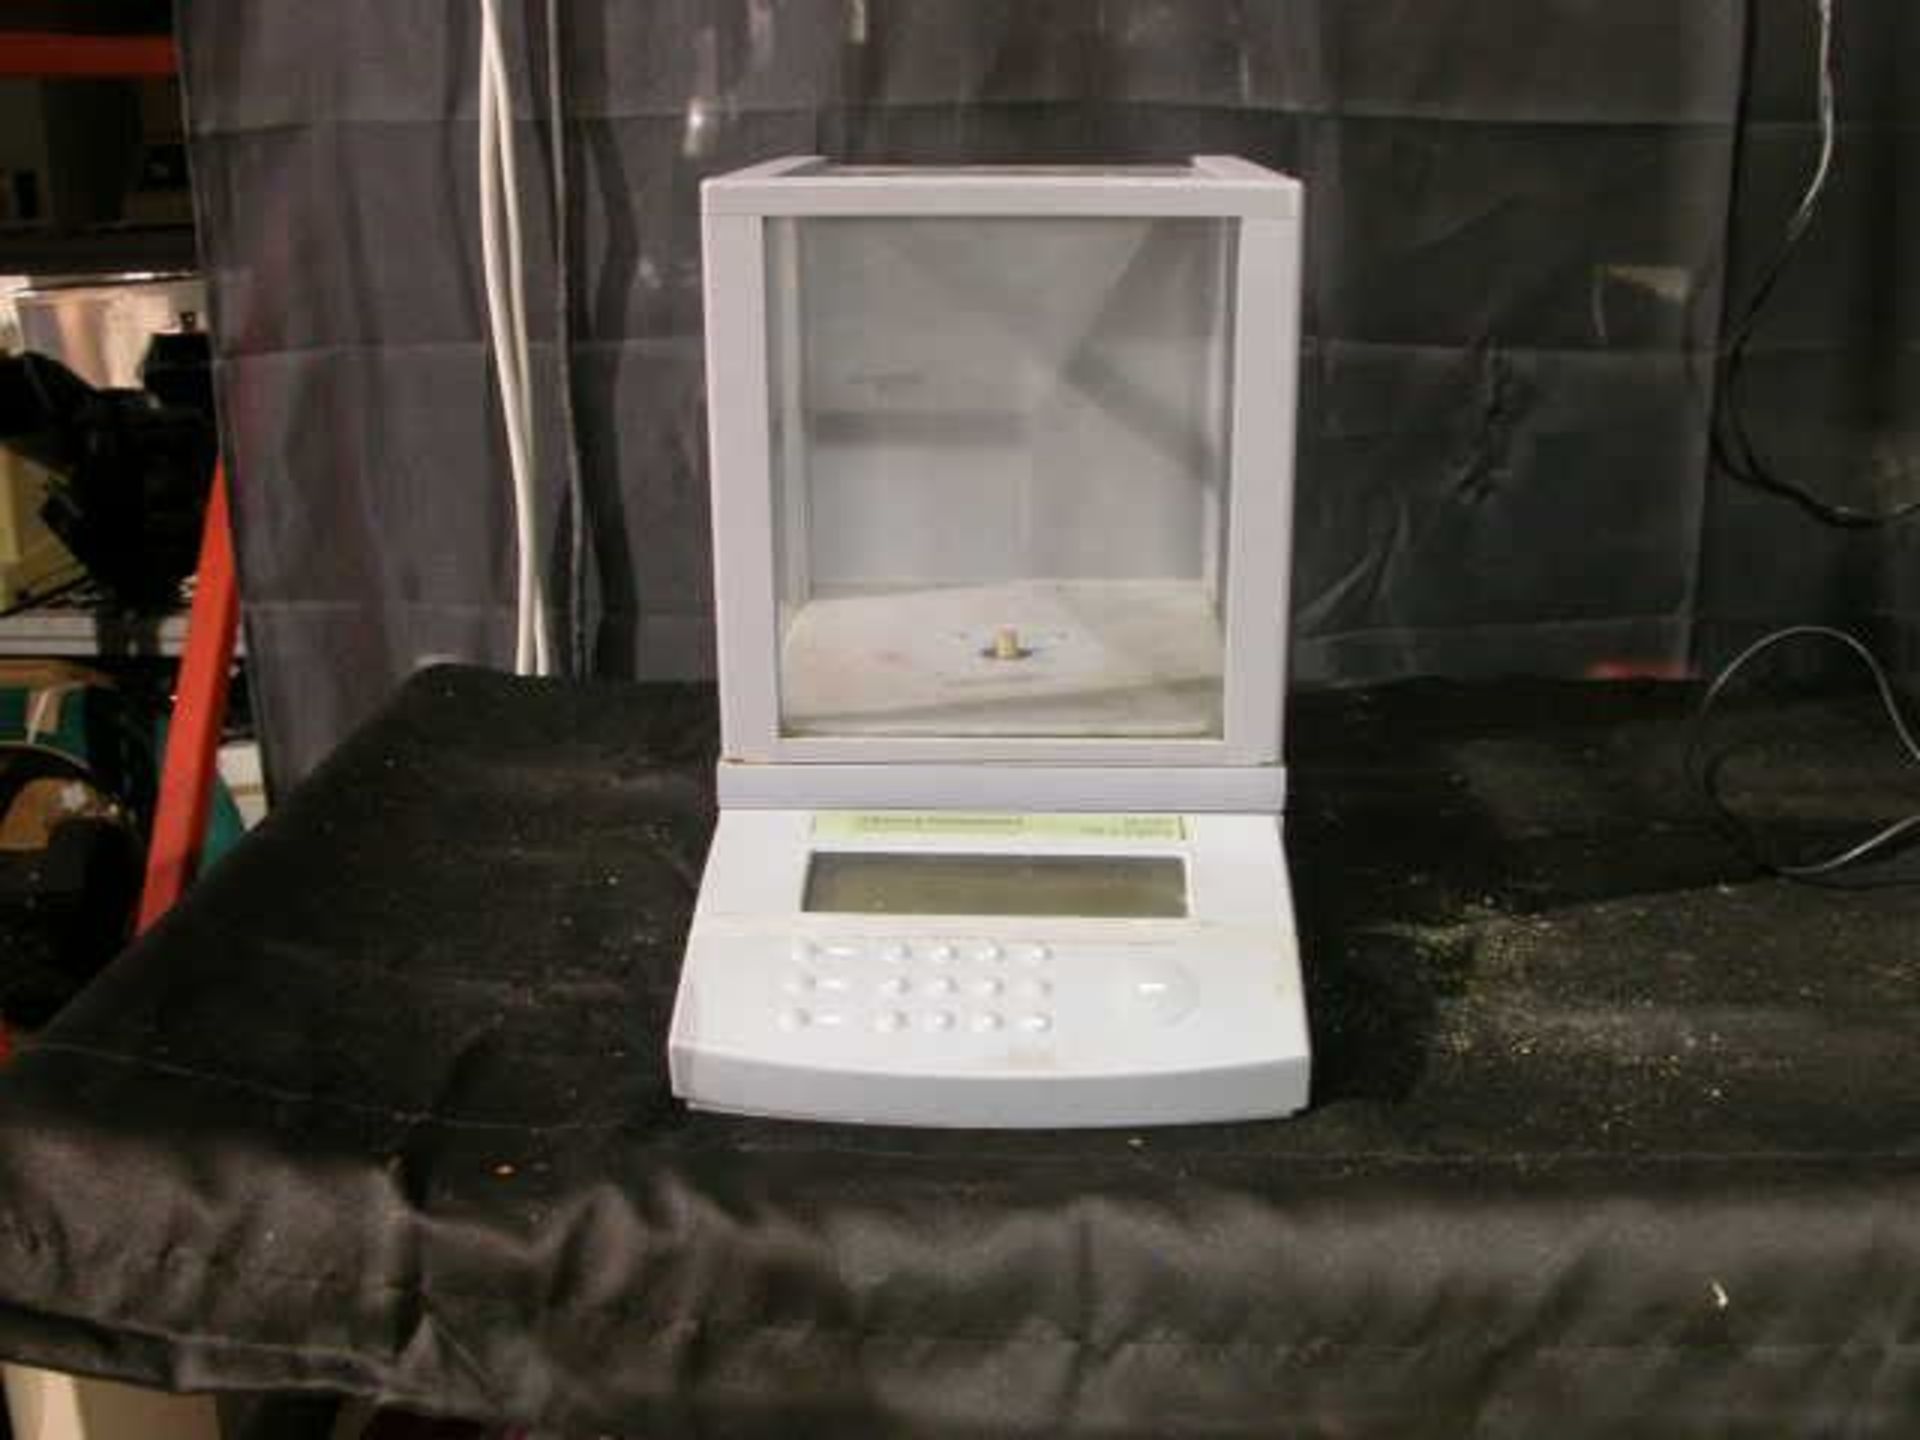 Denver Instruments DI-100 Digital Balance Scale (For Parts Not Working), Qty 1, 320836199790